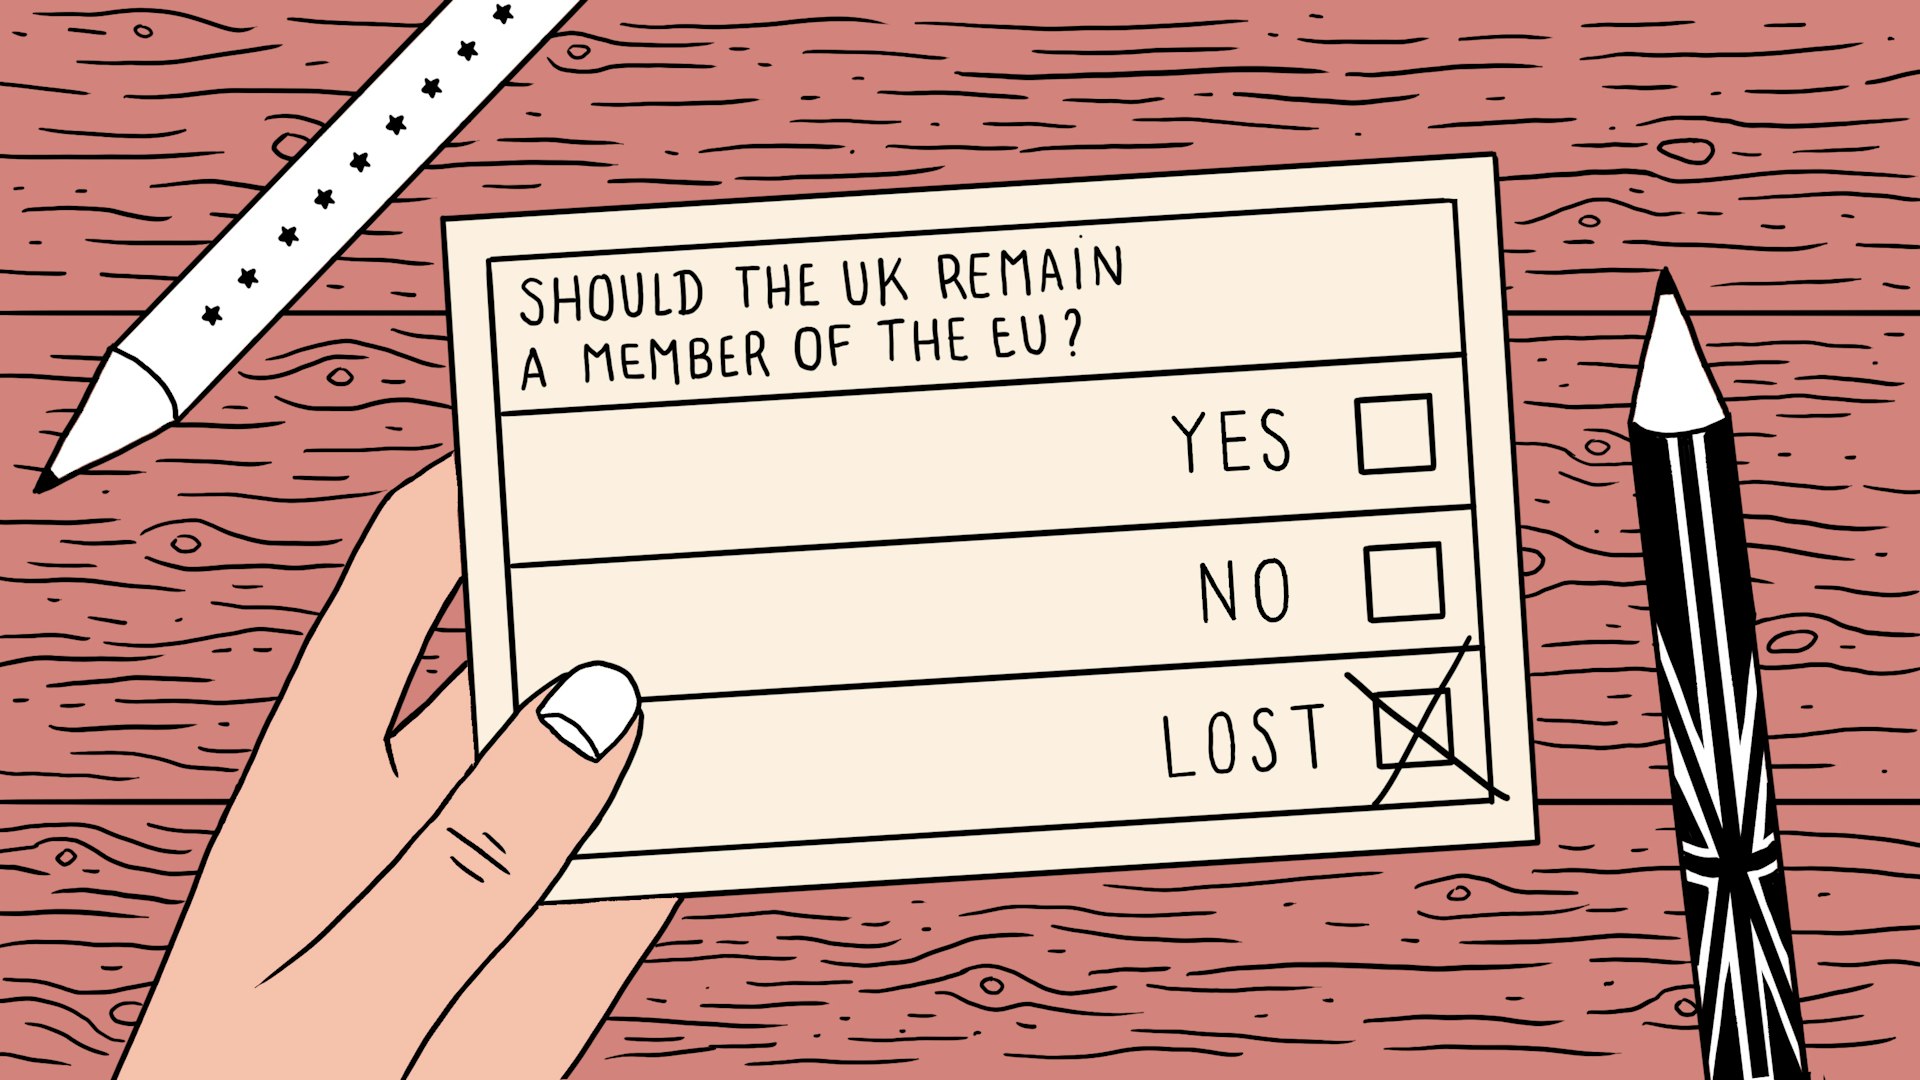 Whatever the outcome, the EU referendum has been an uncomfortable wake-up call